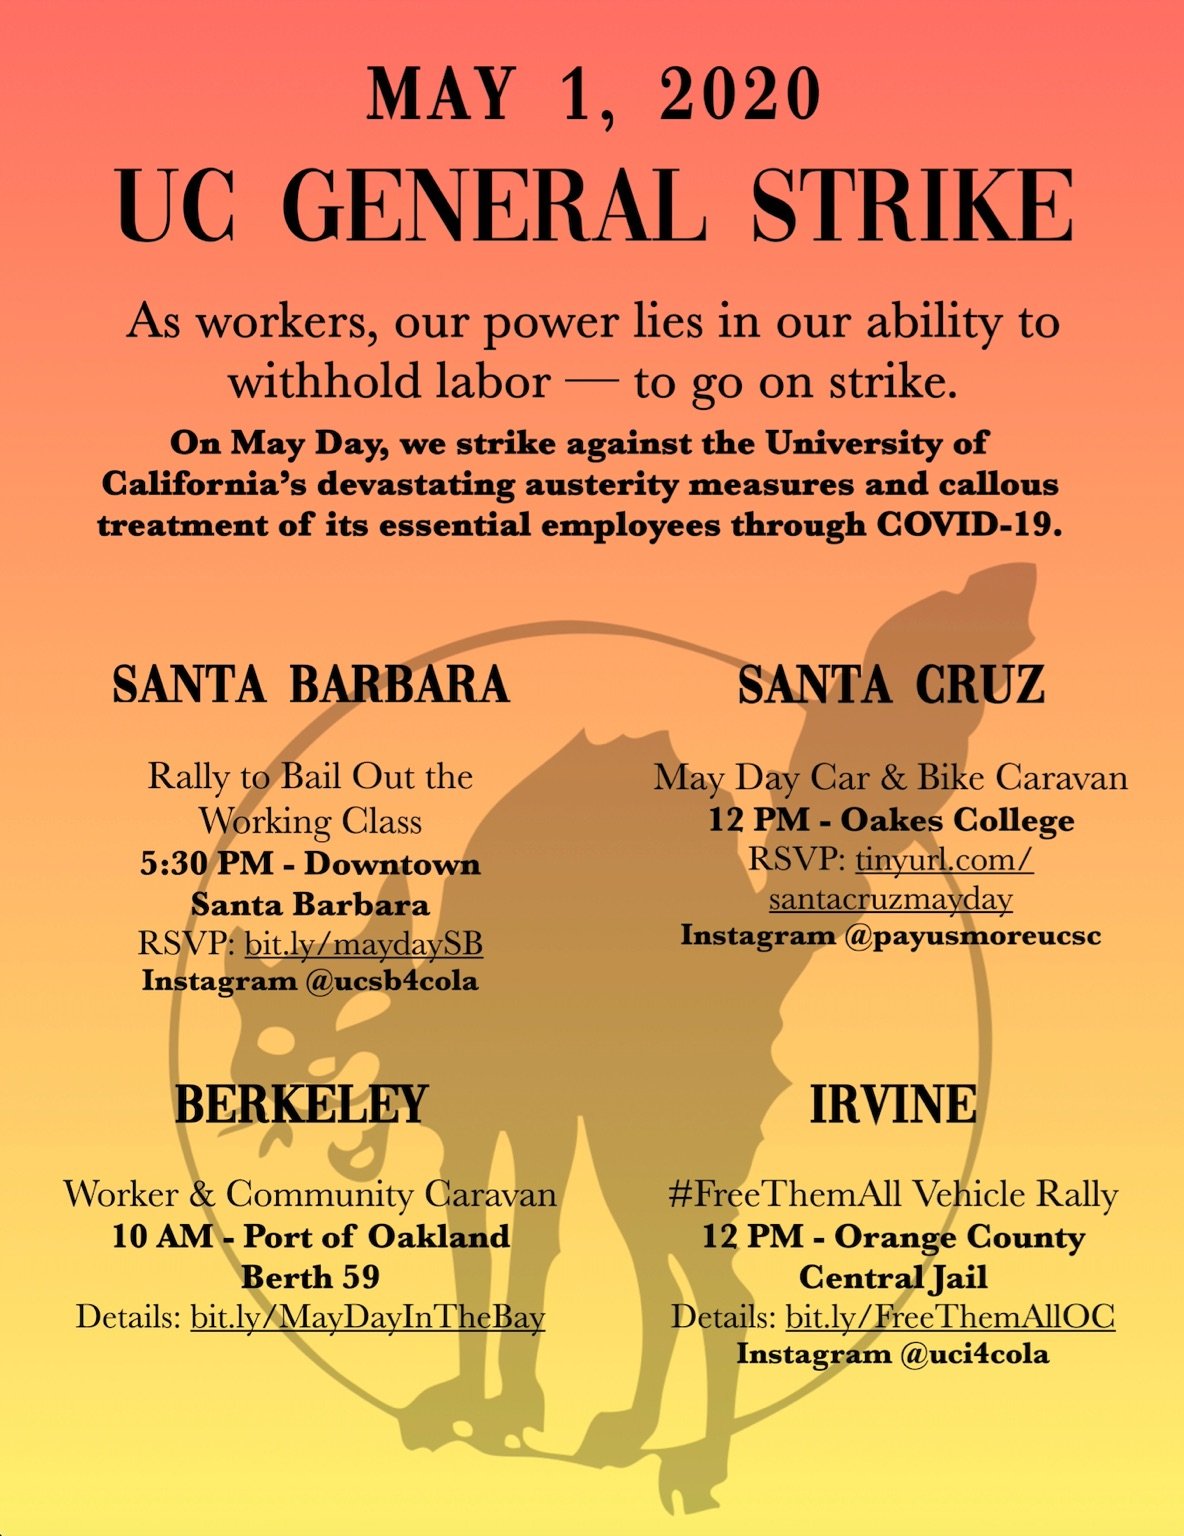 Flyer for all UC campuses: “May 1, 2020 UC General Strike. As workers, our power lies in our ability to withhold labor – to go on strike. On May Day, we strike against the University of California’s devastating austerity measures and callous treatment of its essential employees through COVID-19. Santa Barbara: Rally to Bail Out the Working Class: 5:30 PM - Downtown Santa Barbara. RSVP: bit.ly/maydaySB. Instagram @ucsb4cola. Santa Cruz: May Day Car & Bike Caravan: 12 PM - Oakes College. RSVP: tinyurl.com/santacruzmayday. Instagram @payusmoreucsc. Berkeley: Worker & Community Caravan. 10 AM - Port of Oakland Berth 59. Details: bit.ly/MayDayInTheBay. Irvine: #FreeThemAll Vehicle Rally: 12 PM - Orange County Central Jail. Details: bit.ly/FreeThemAllOC. Instagram @uci4cola.”